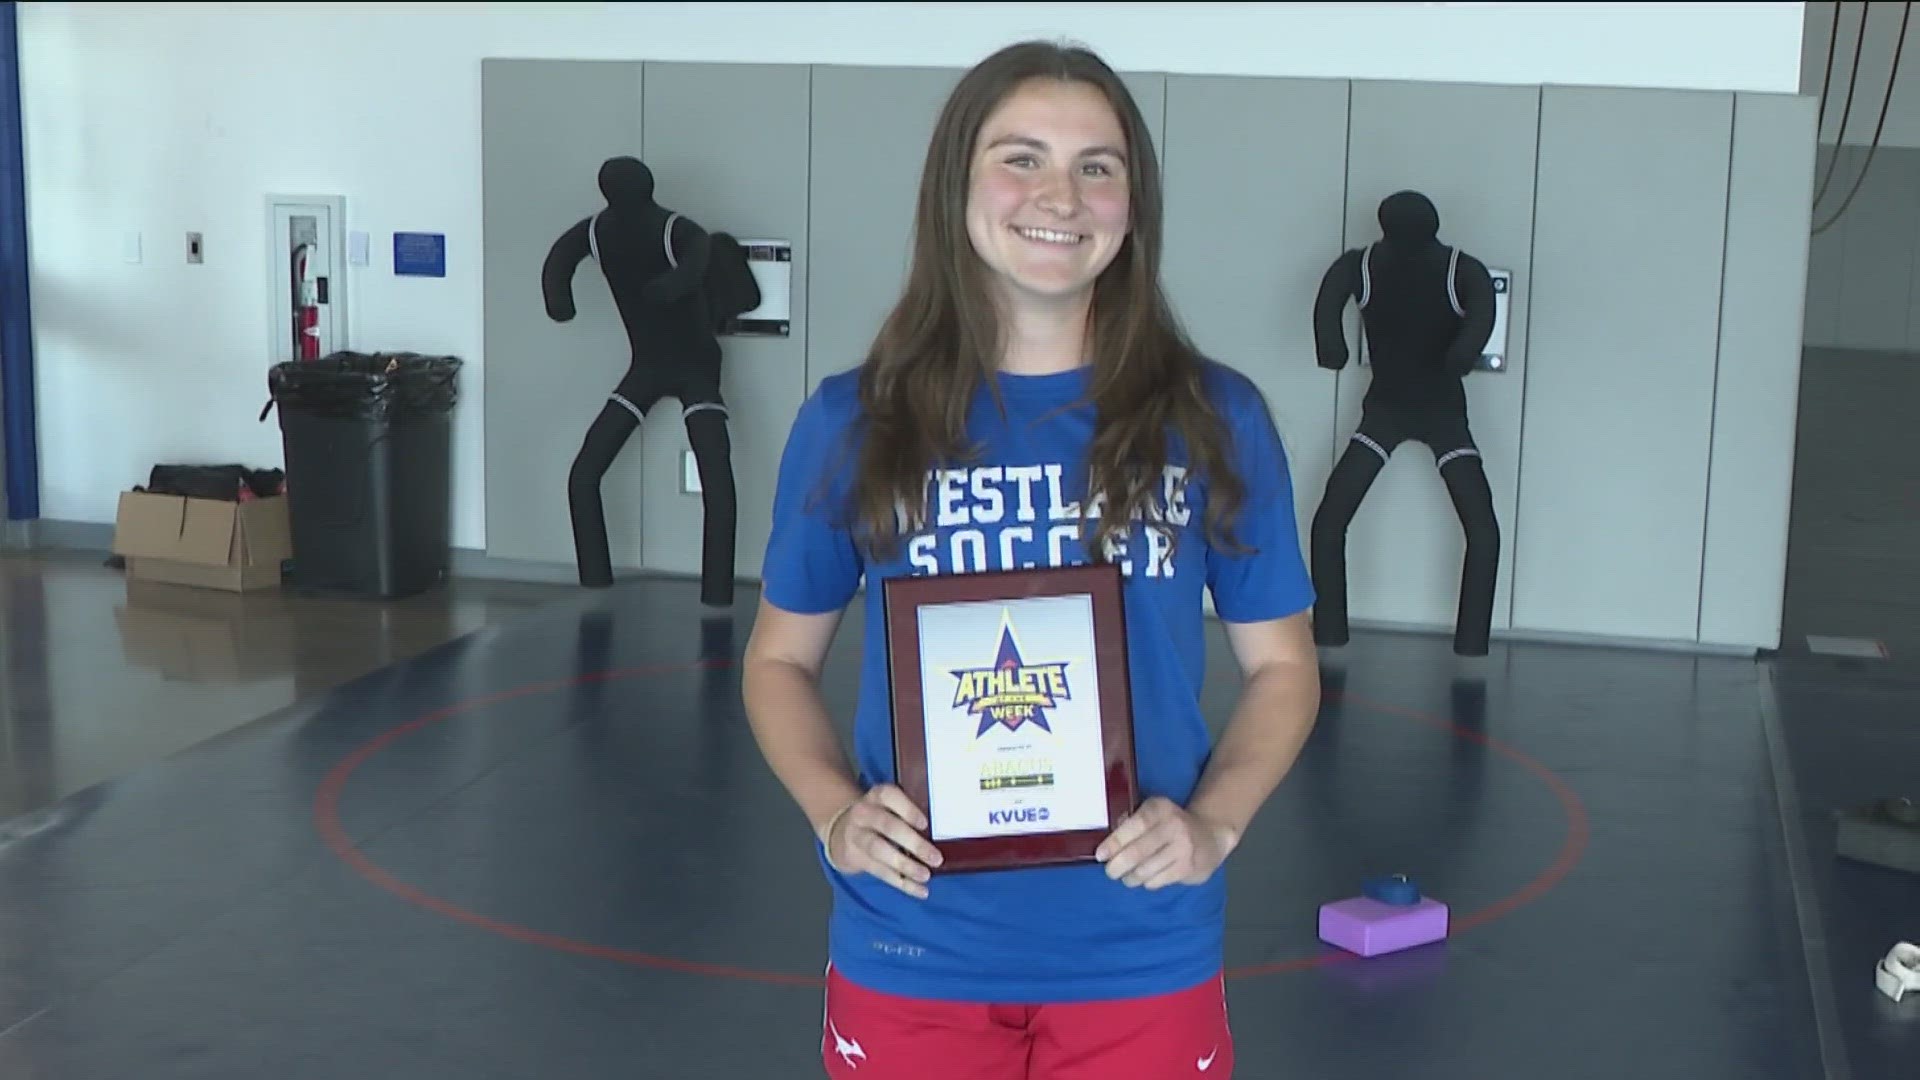 Kate Grannis with Westlake soccer is our Athlete of the Week. The team captain is a Virginia Tech commit.